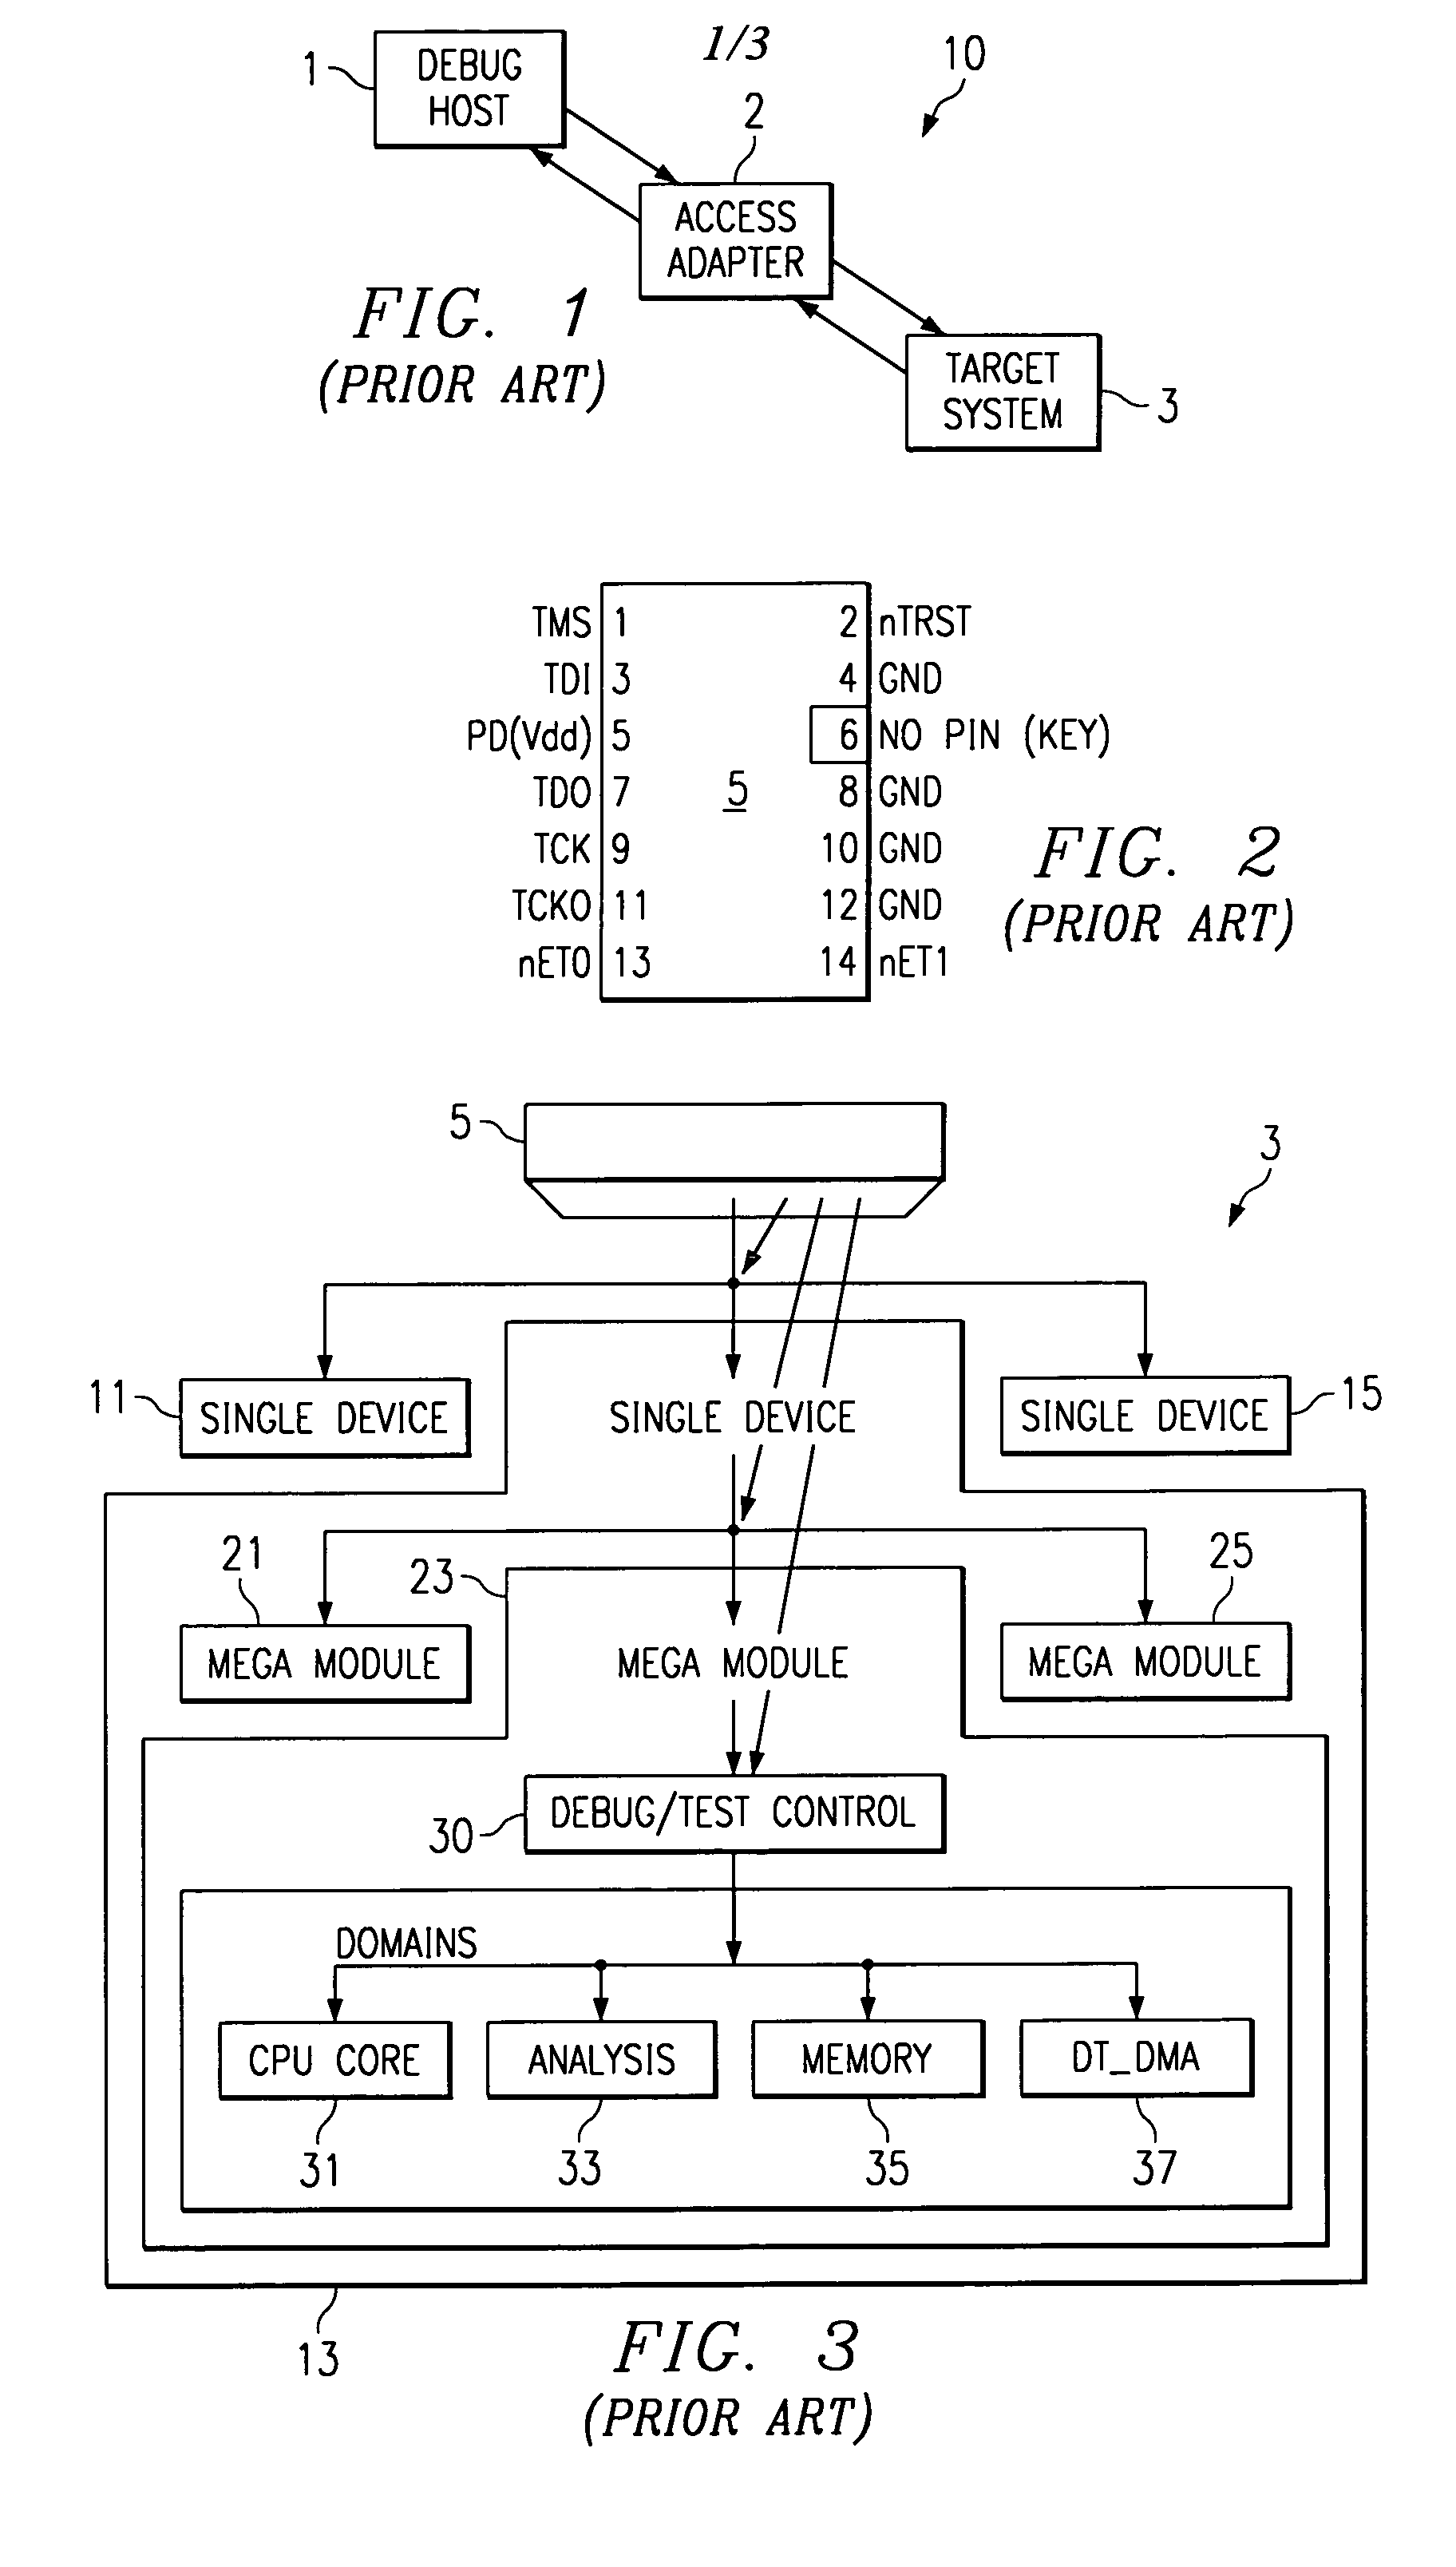 Emulation system with peripherals recording emulation frame when stop generated